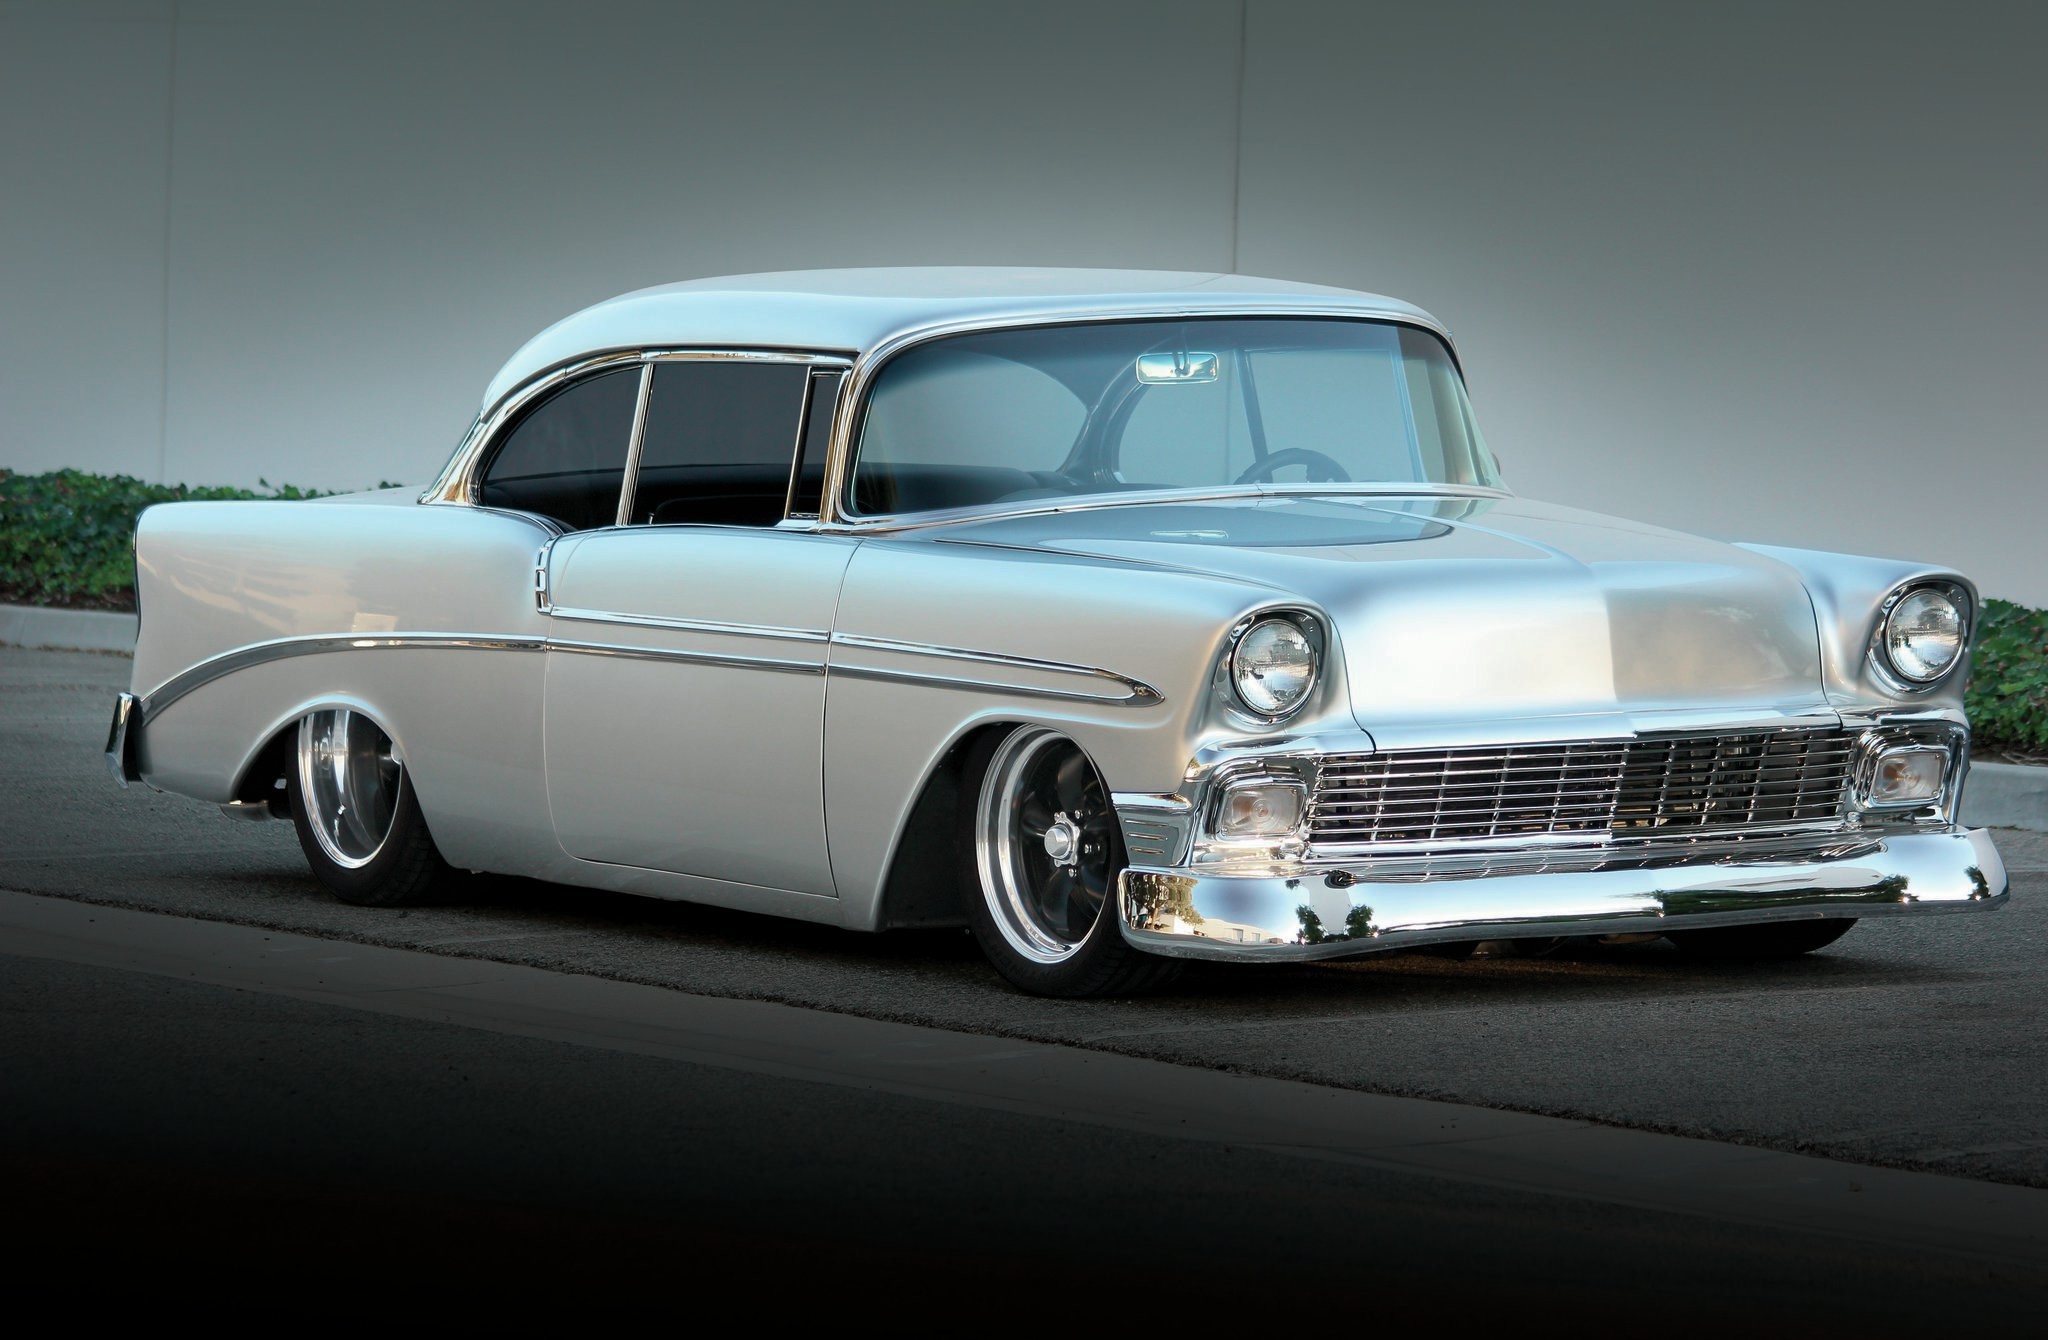 2048x1340 classic cars | Car of the Week: 1957 Chevrolet Bel Air - Old Cars Weekly |  Seb's cars | Pinterest | Bel air, Chevy and 1957 chevrolet